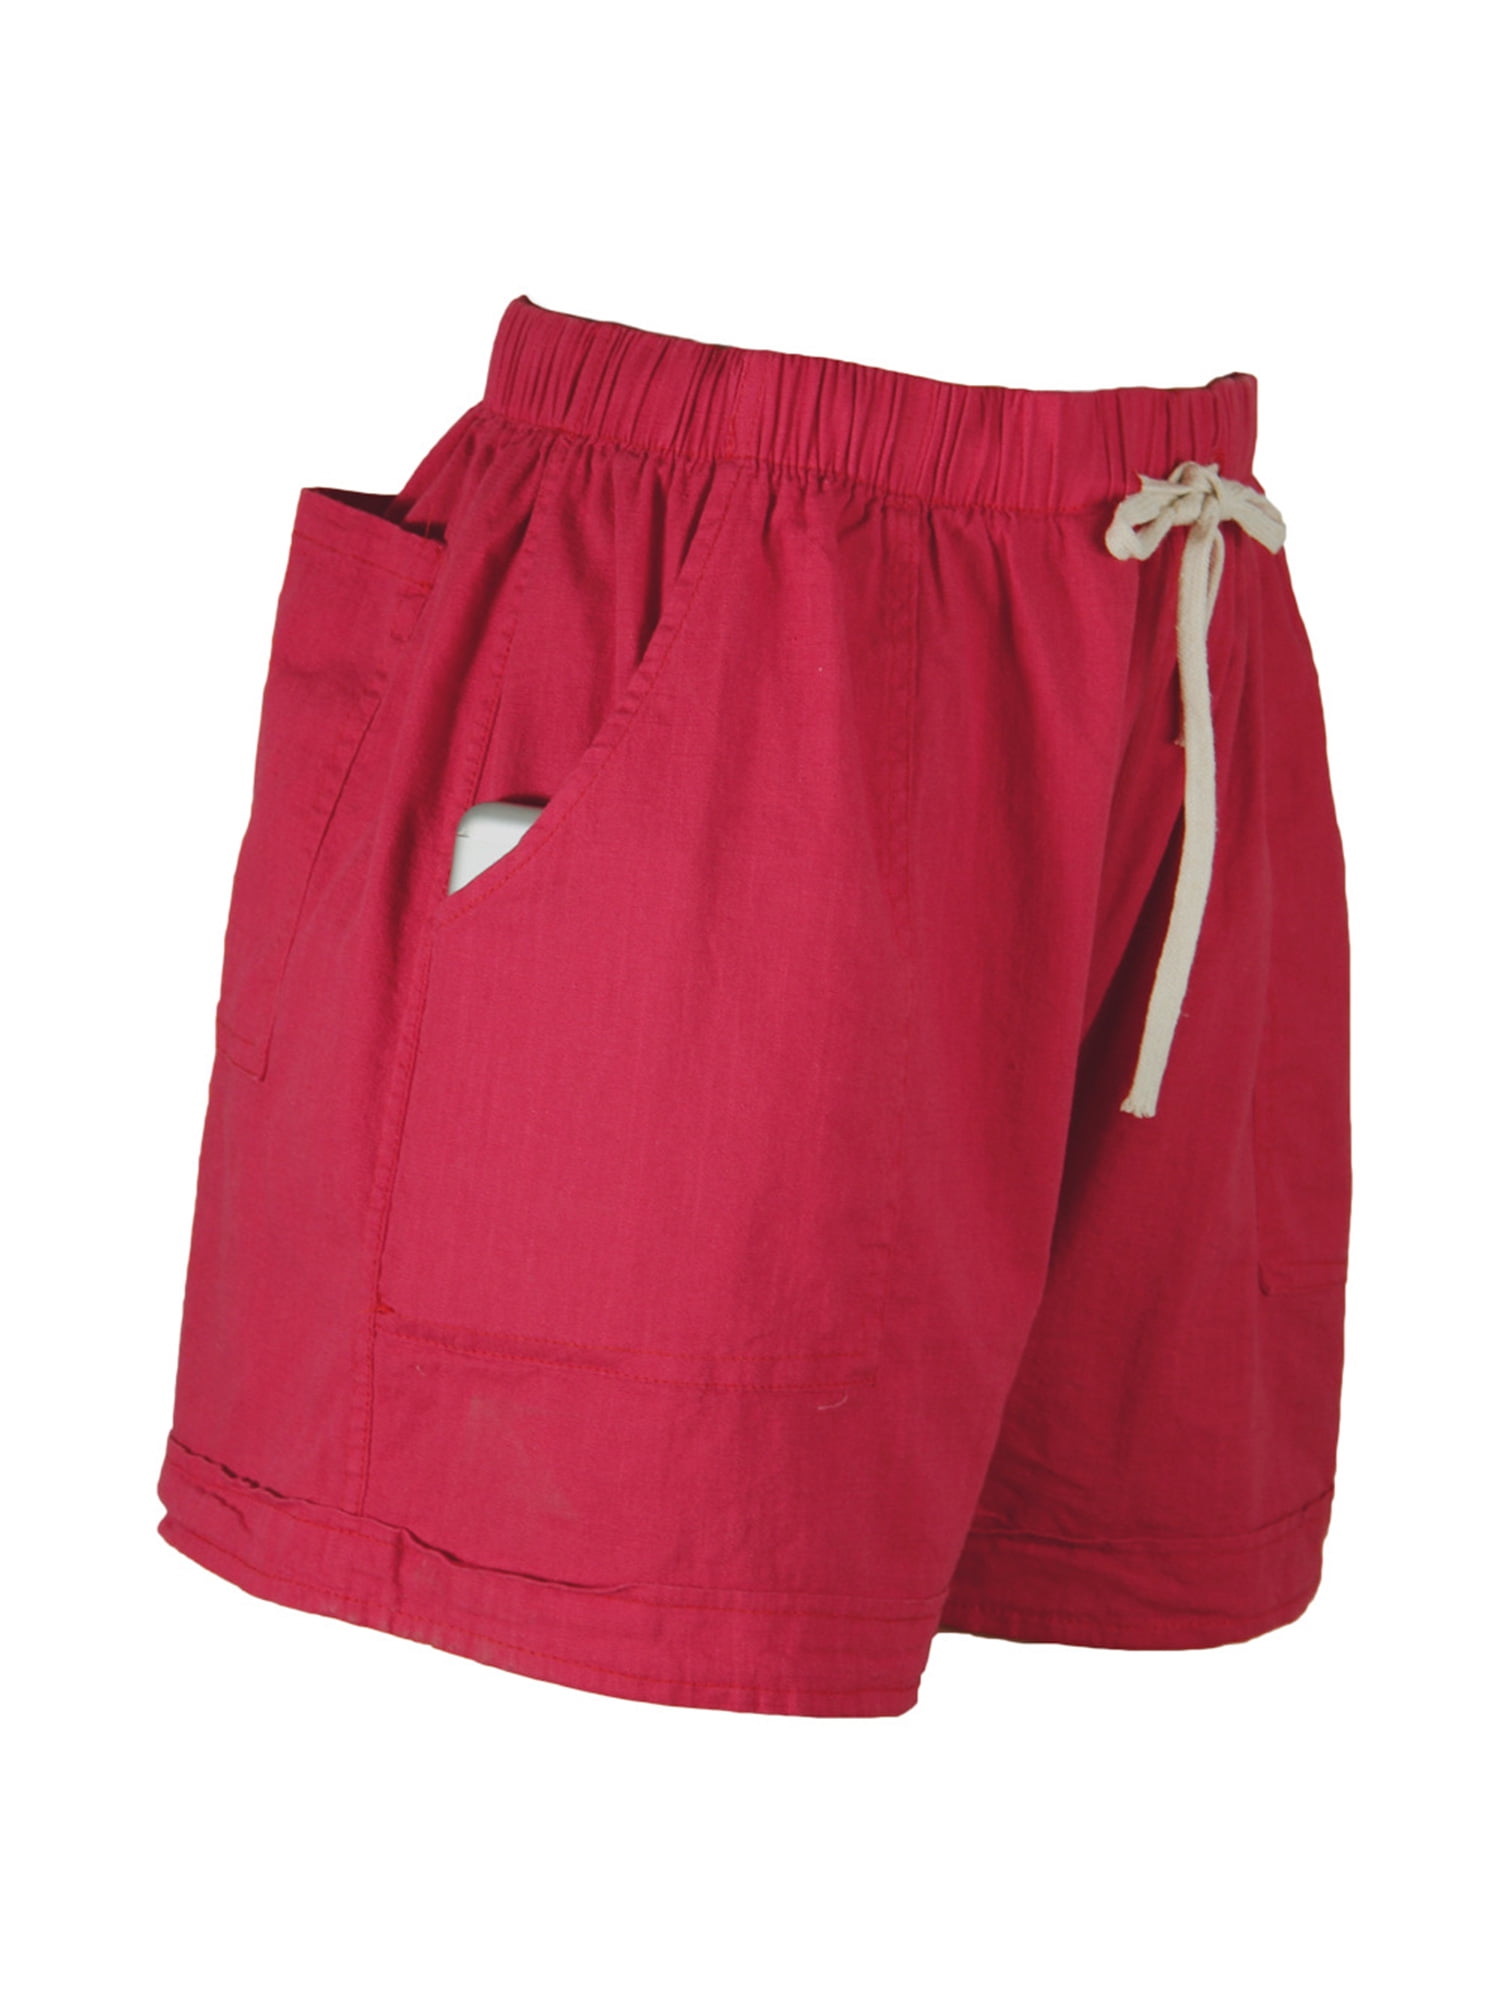 shorts pants for ladies